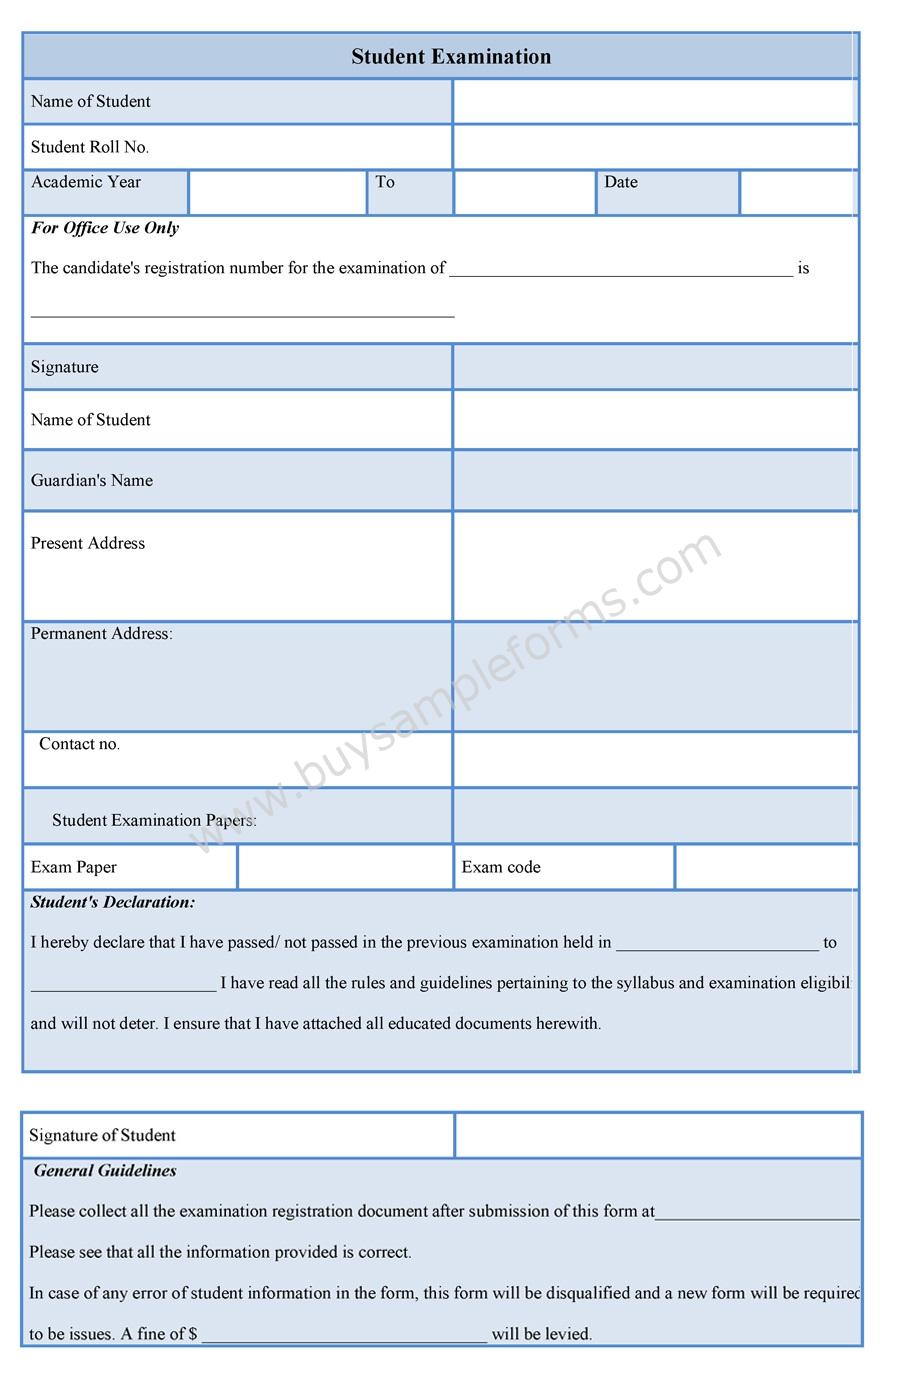 Student Examination Form template